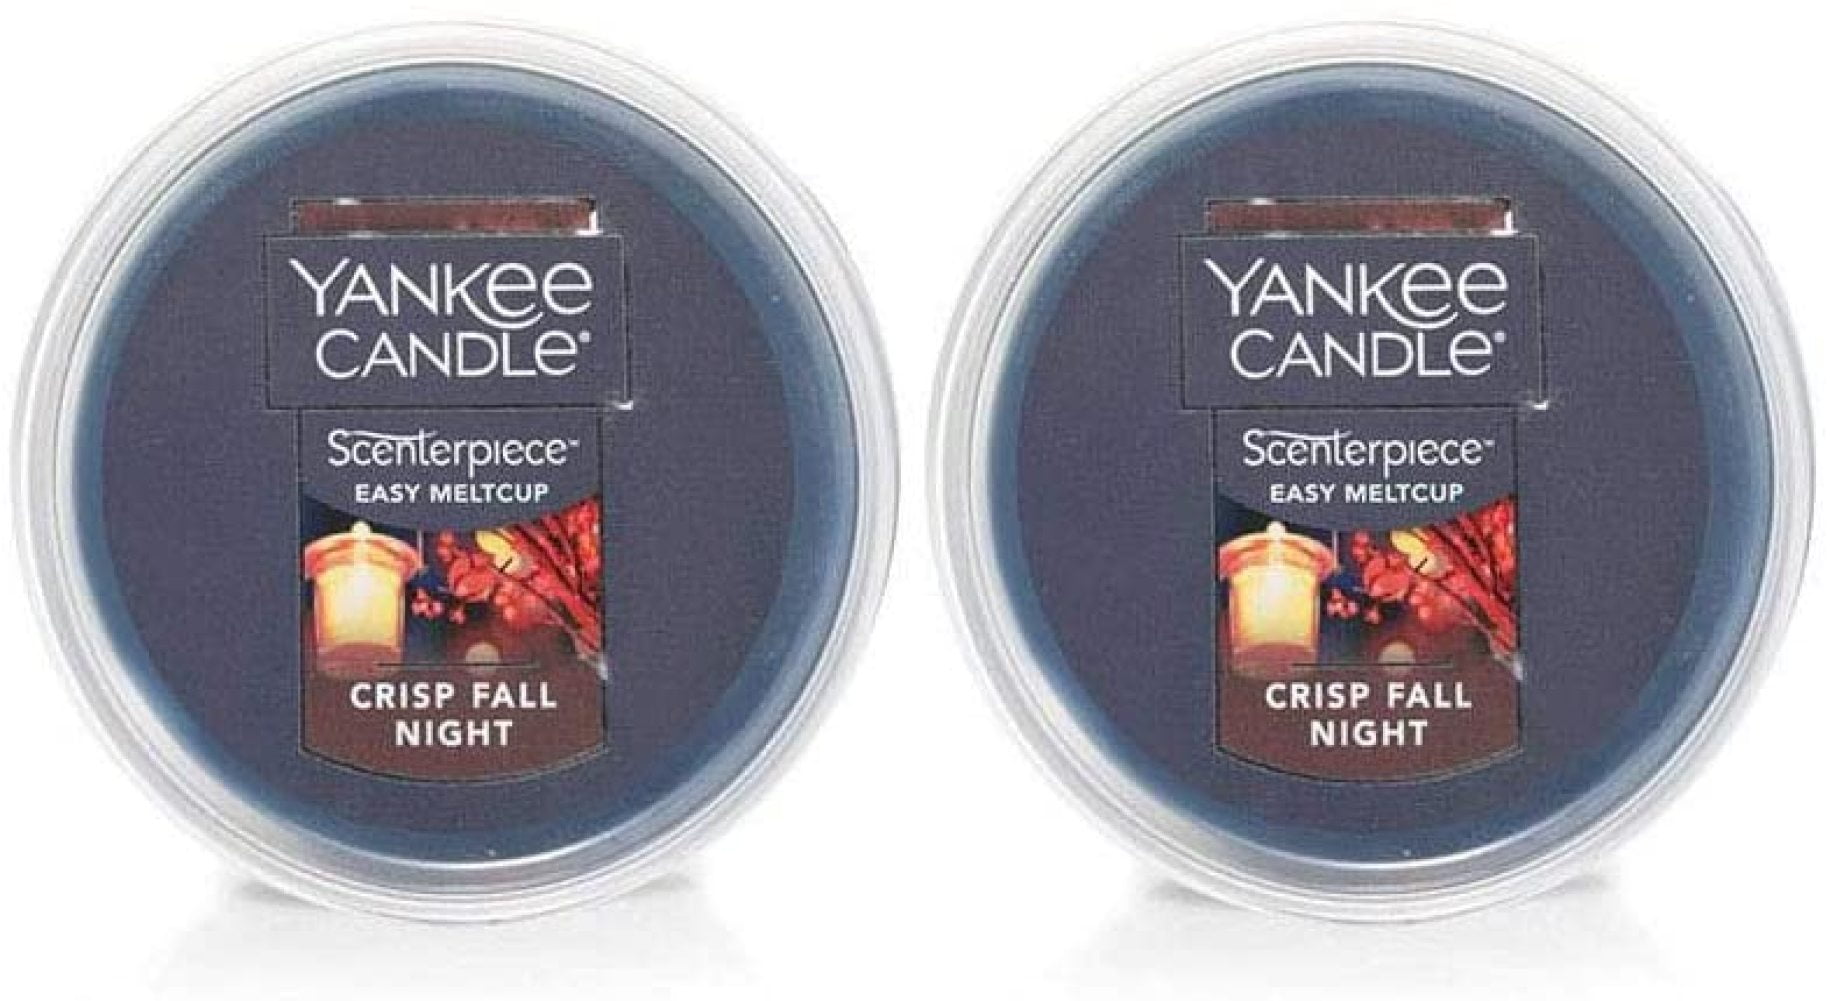 Yankee Candle rare candlelit  cabin  Scenterpiece Melt Cup brand new 